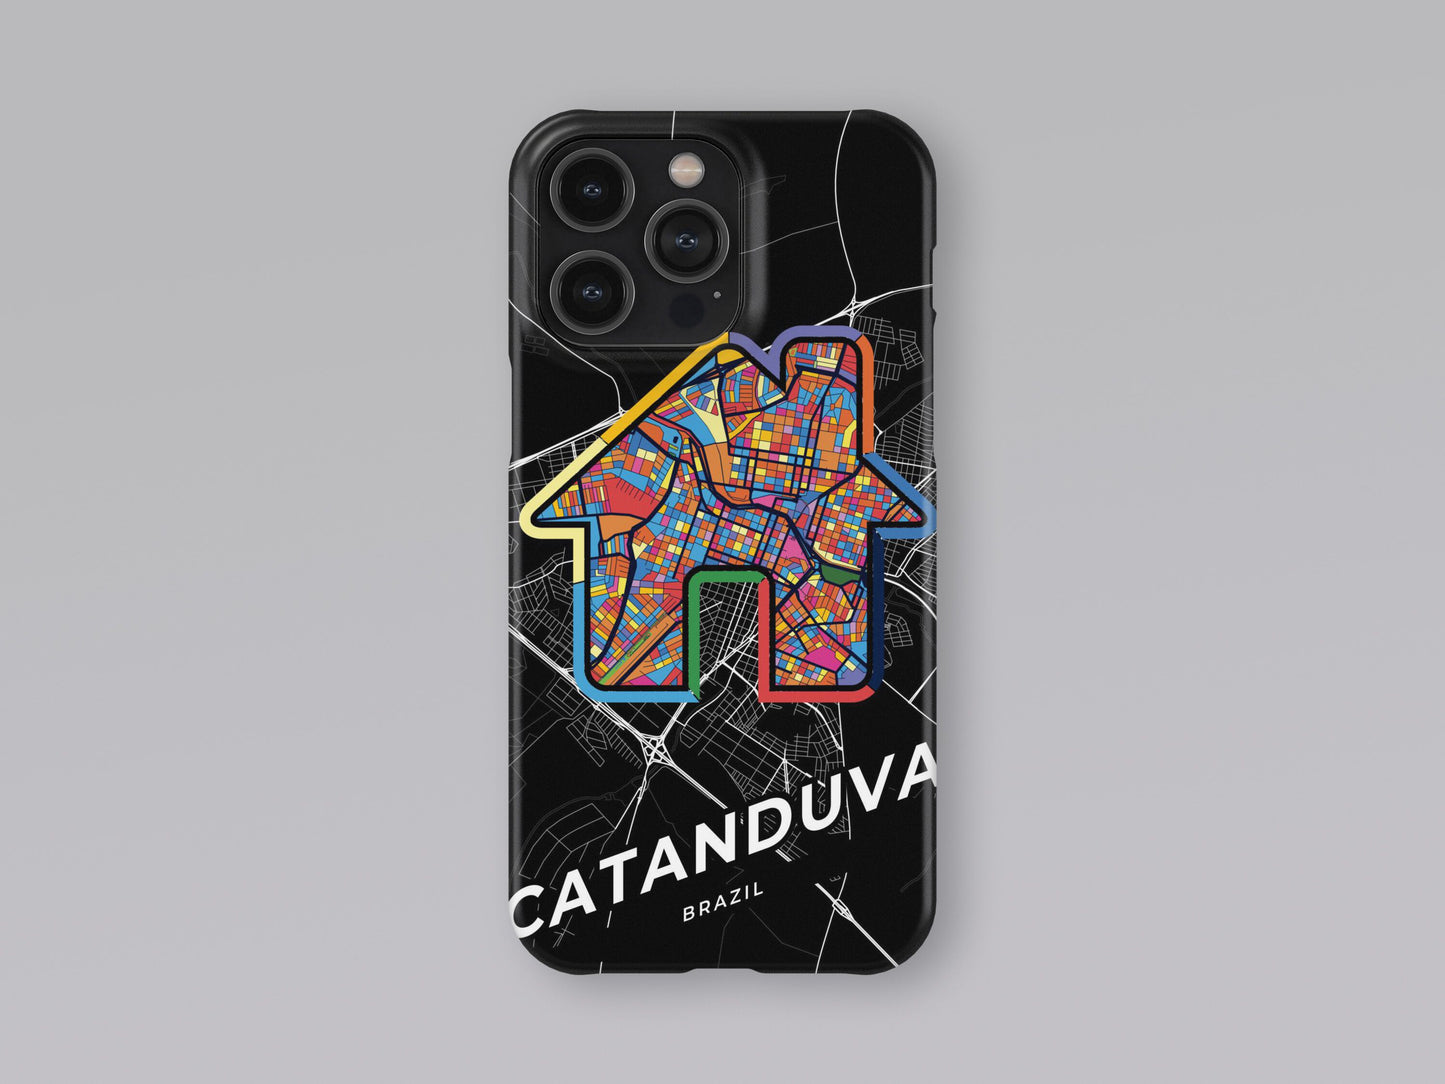 Catanduva Brazil slim phone case with colorful icon. Birthday, wedding or housewarming gift. Couple match cases. 3